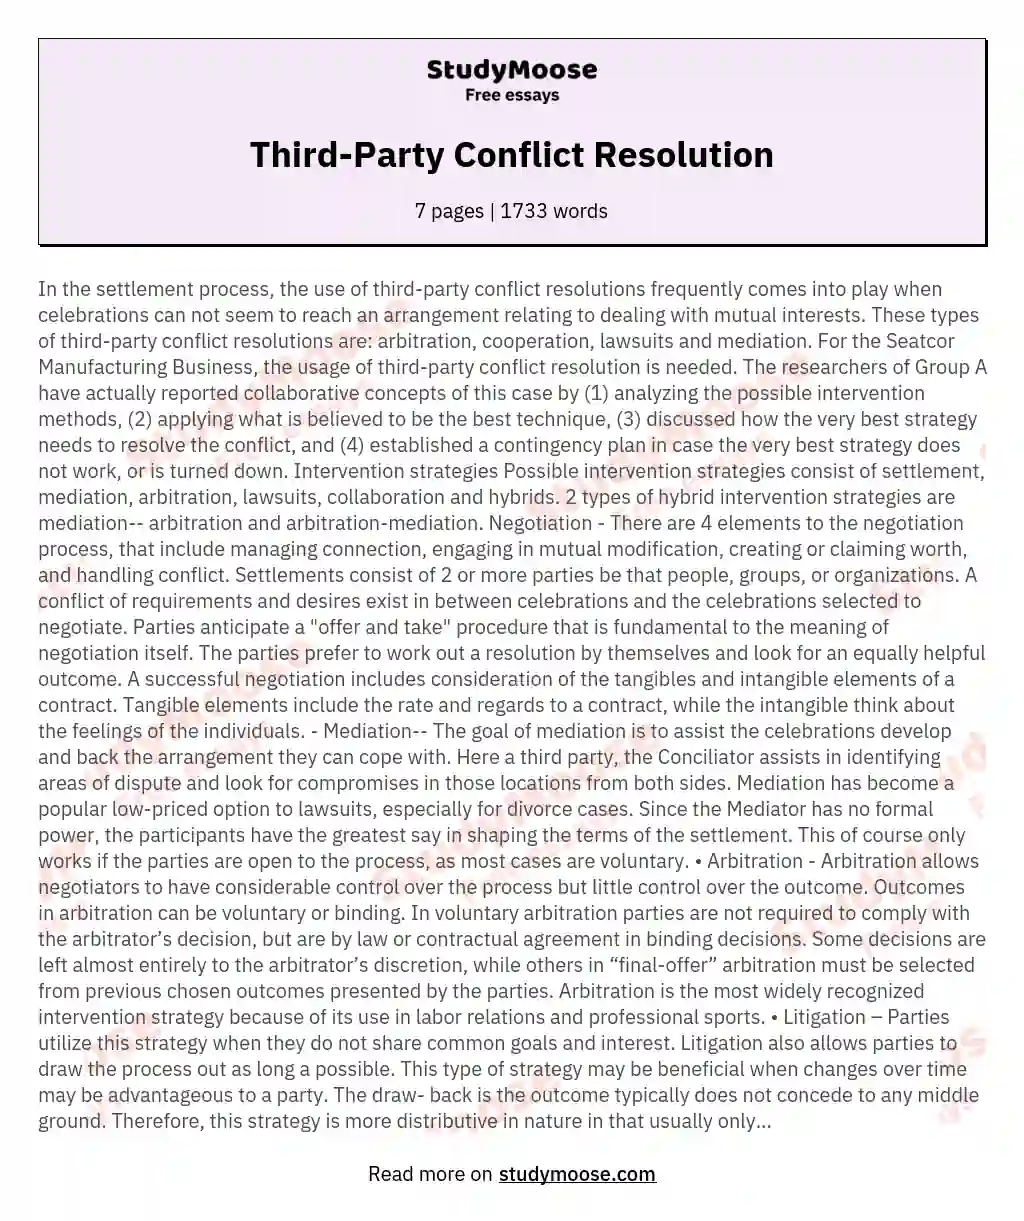 Third-Party Conflict Resolution essay